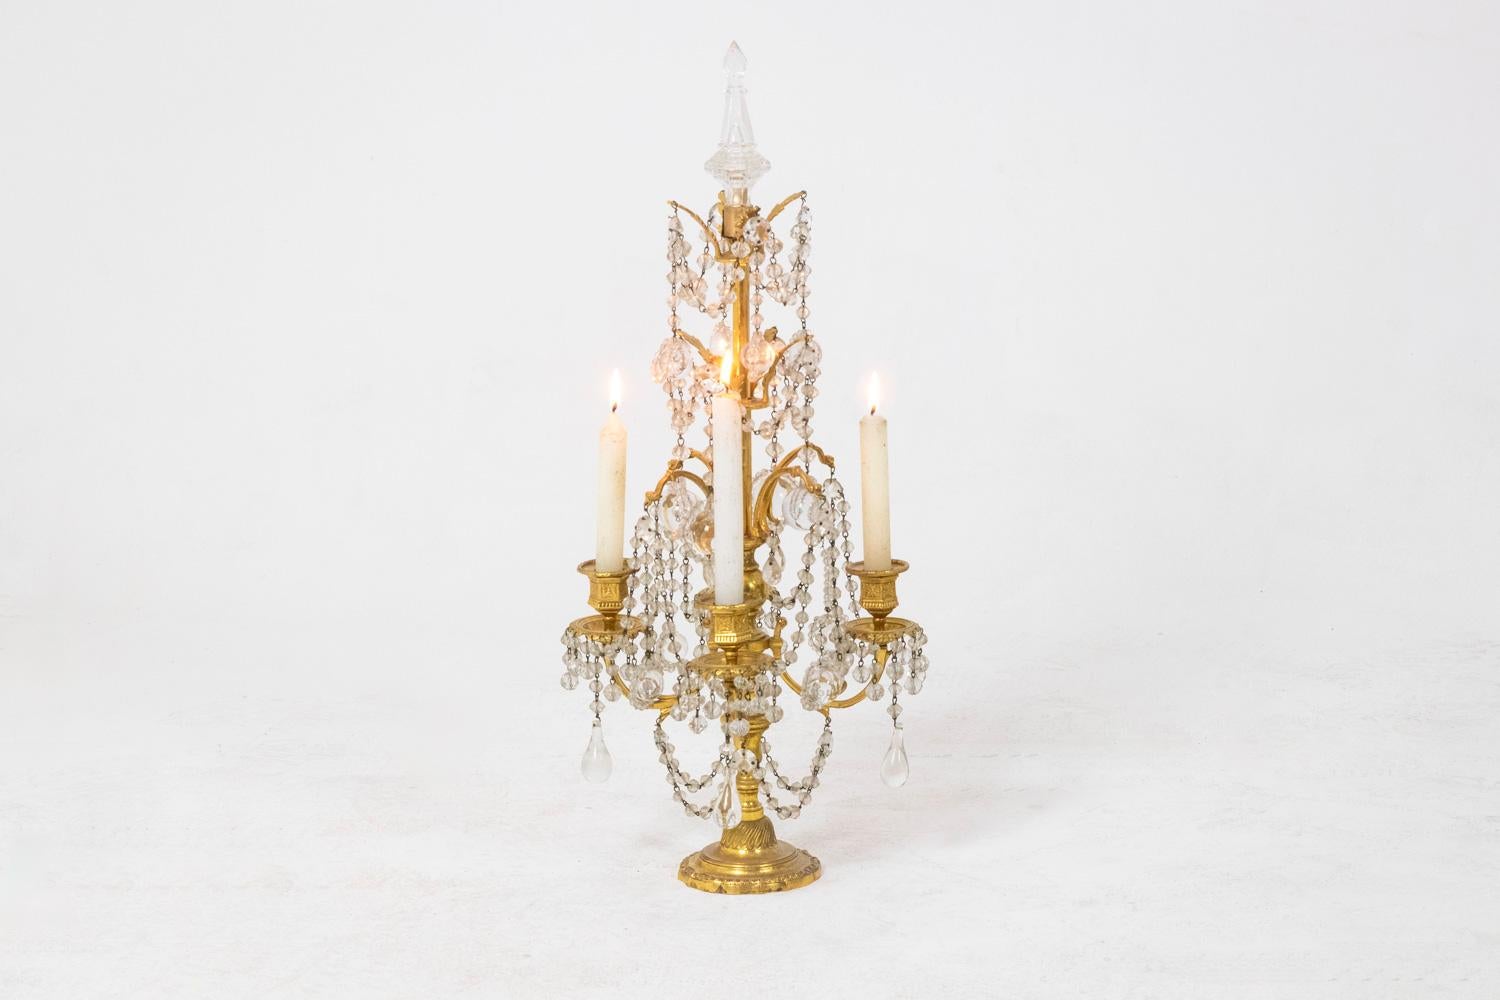 Pair of Louis XVI style candelabra in gilded bronze and crystal, with four sconces, decorated with pendants and ending in the upper part with a knife. Round shaped base.

Work realized circa 1900.